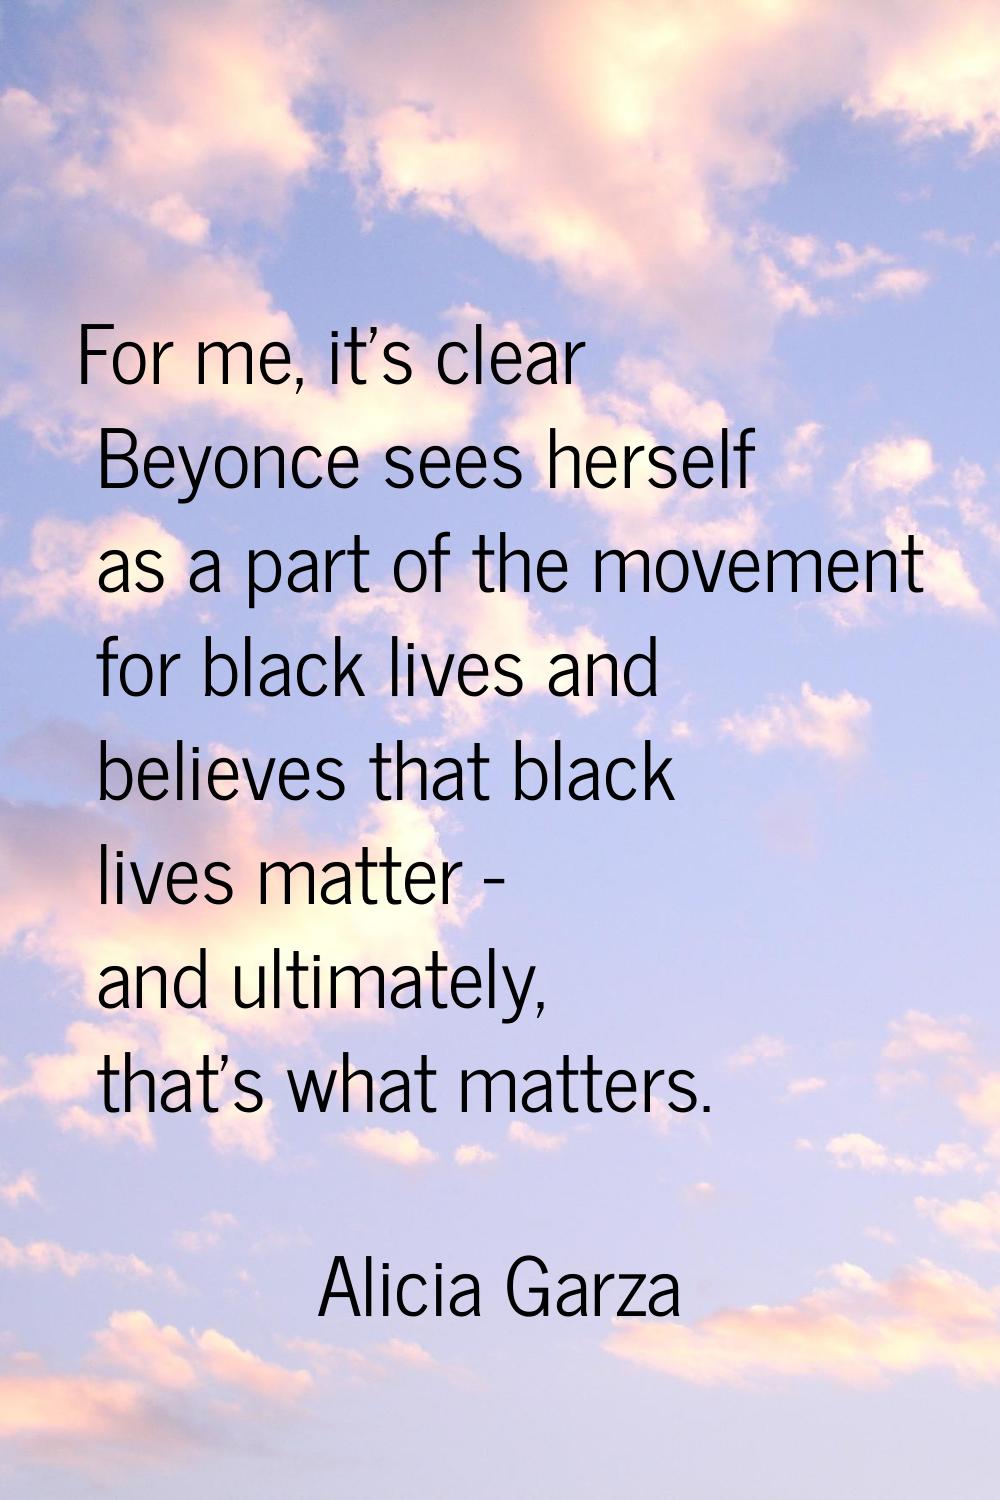 For me, it's clear Beyonce sees herself as a part of the movement for black lives and believes that